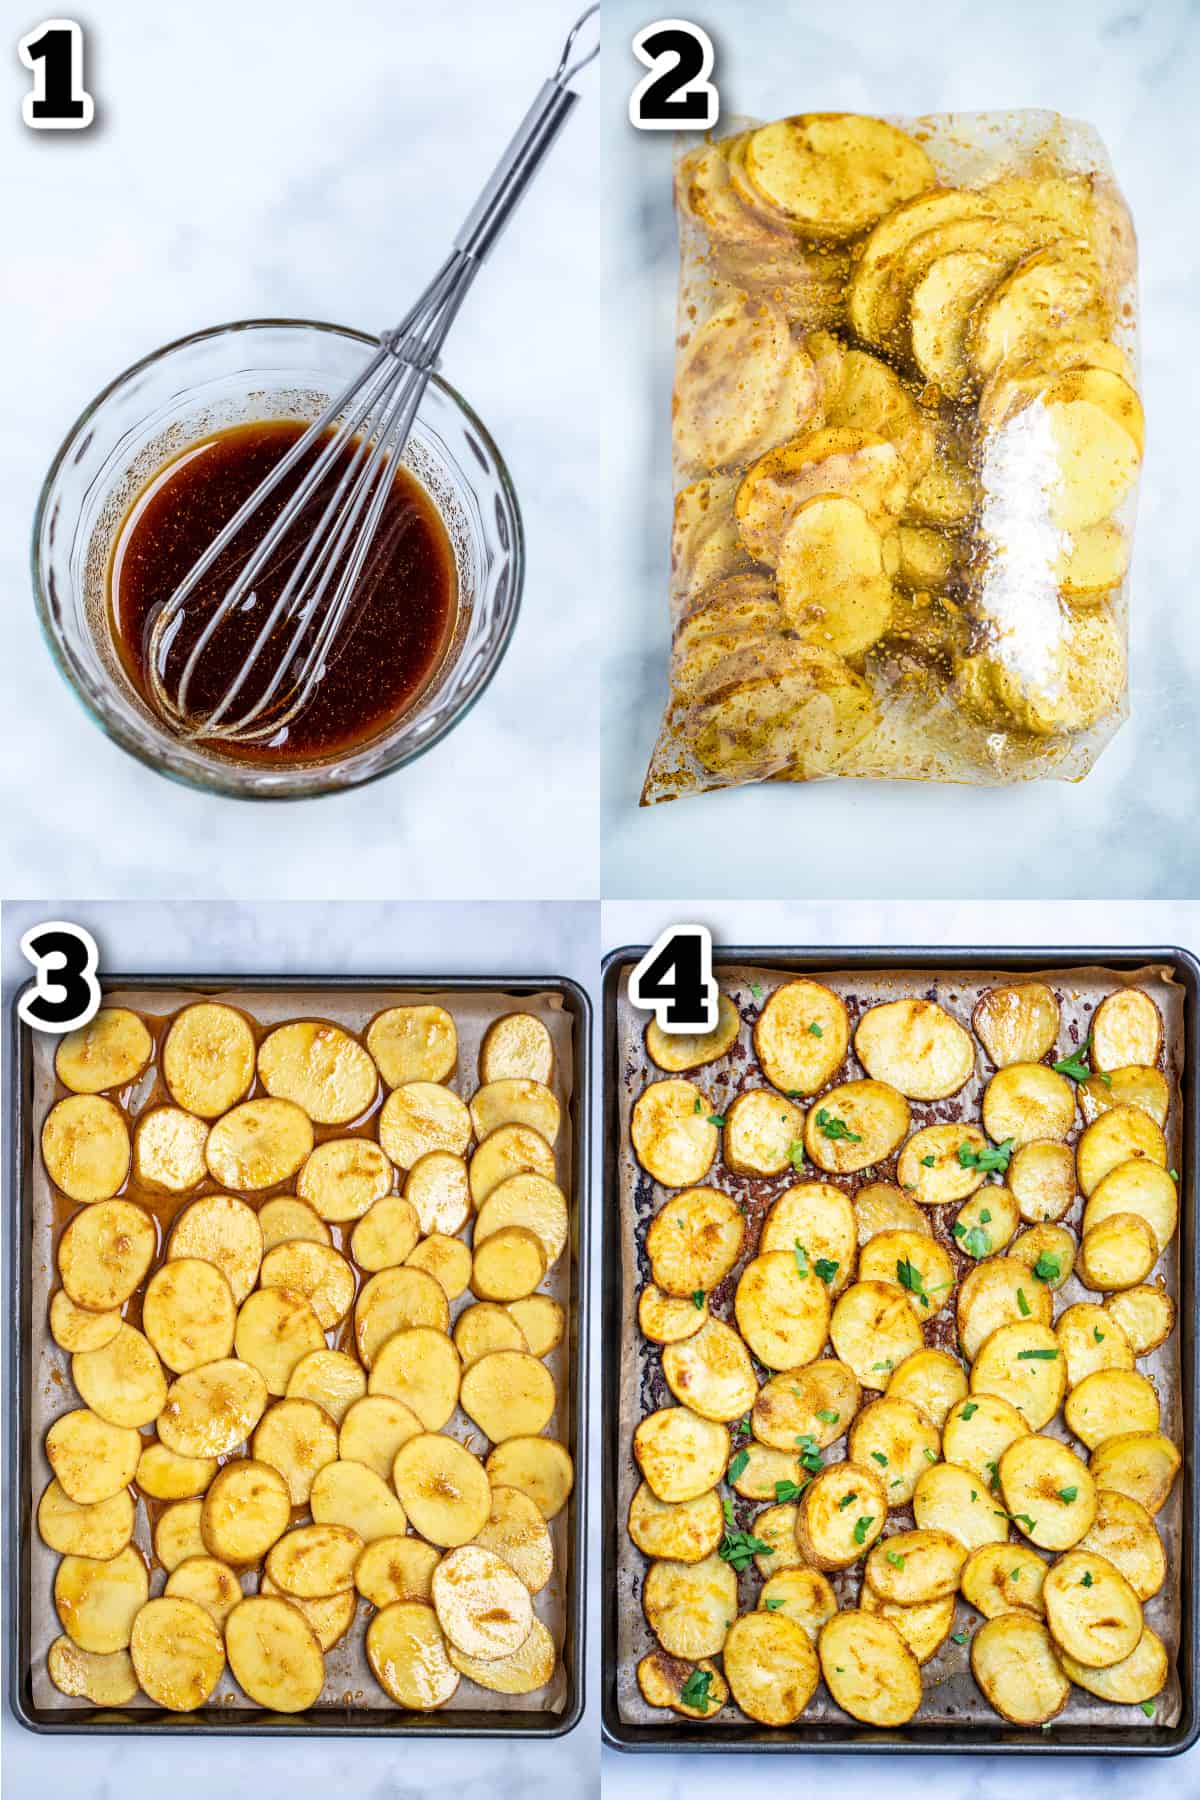 Step by step photos for how to make baked potato slices.